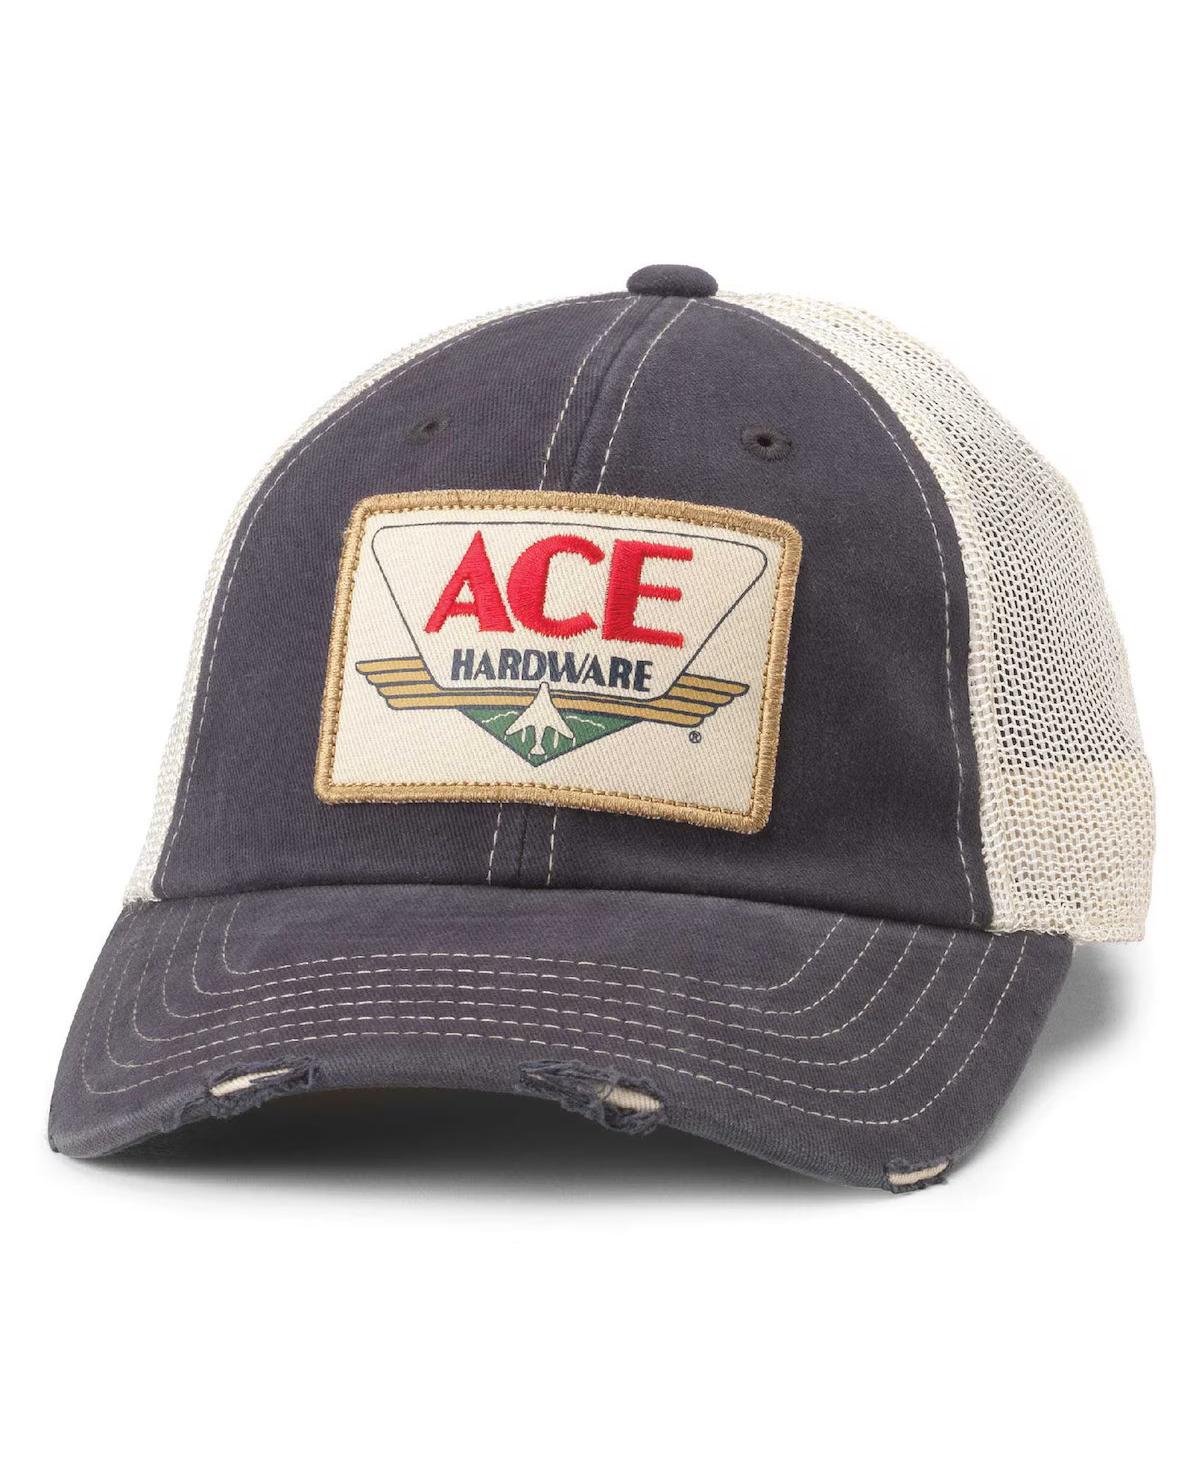 American Needle Men's Navy/natural Ace Hardware Orville Adjustable Hat In Gray